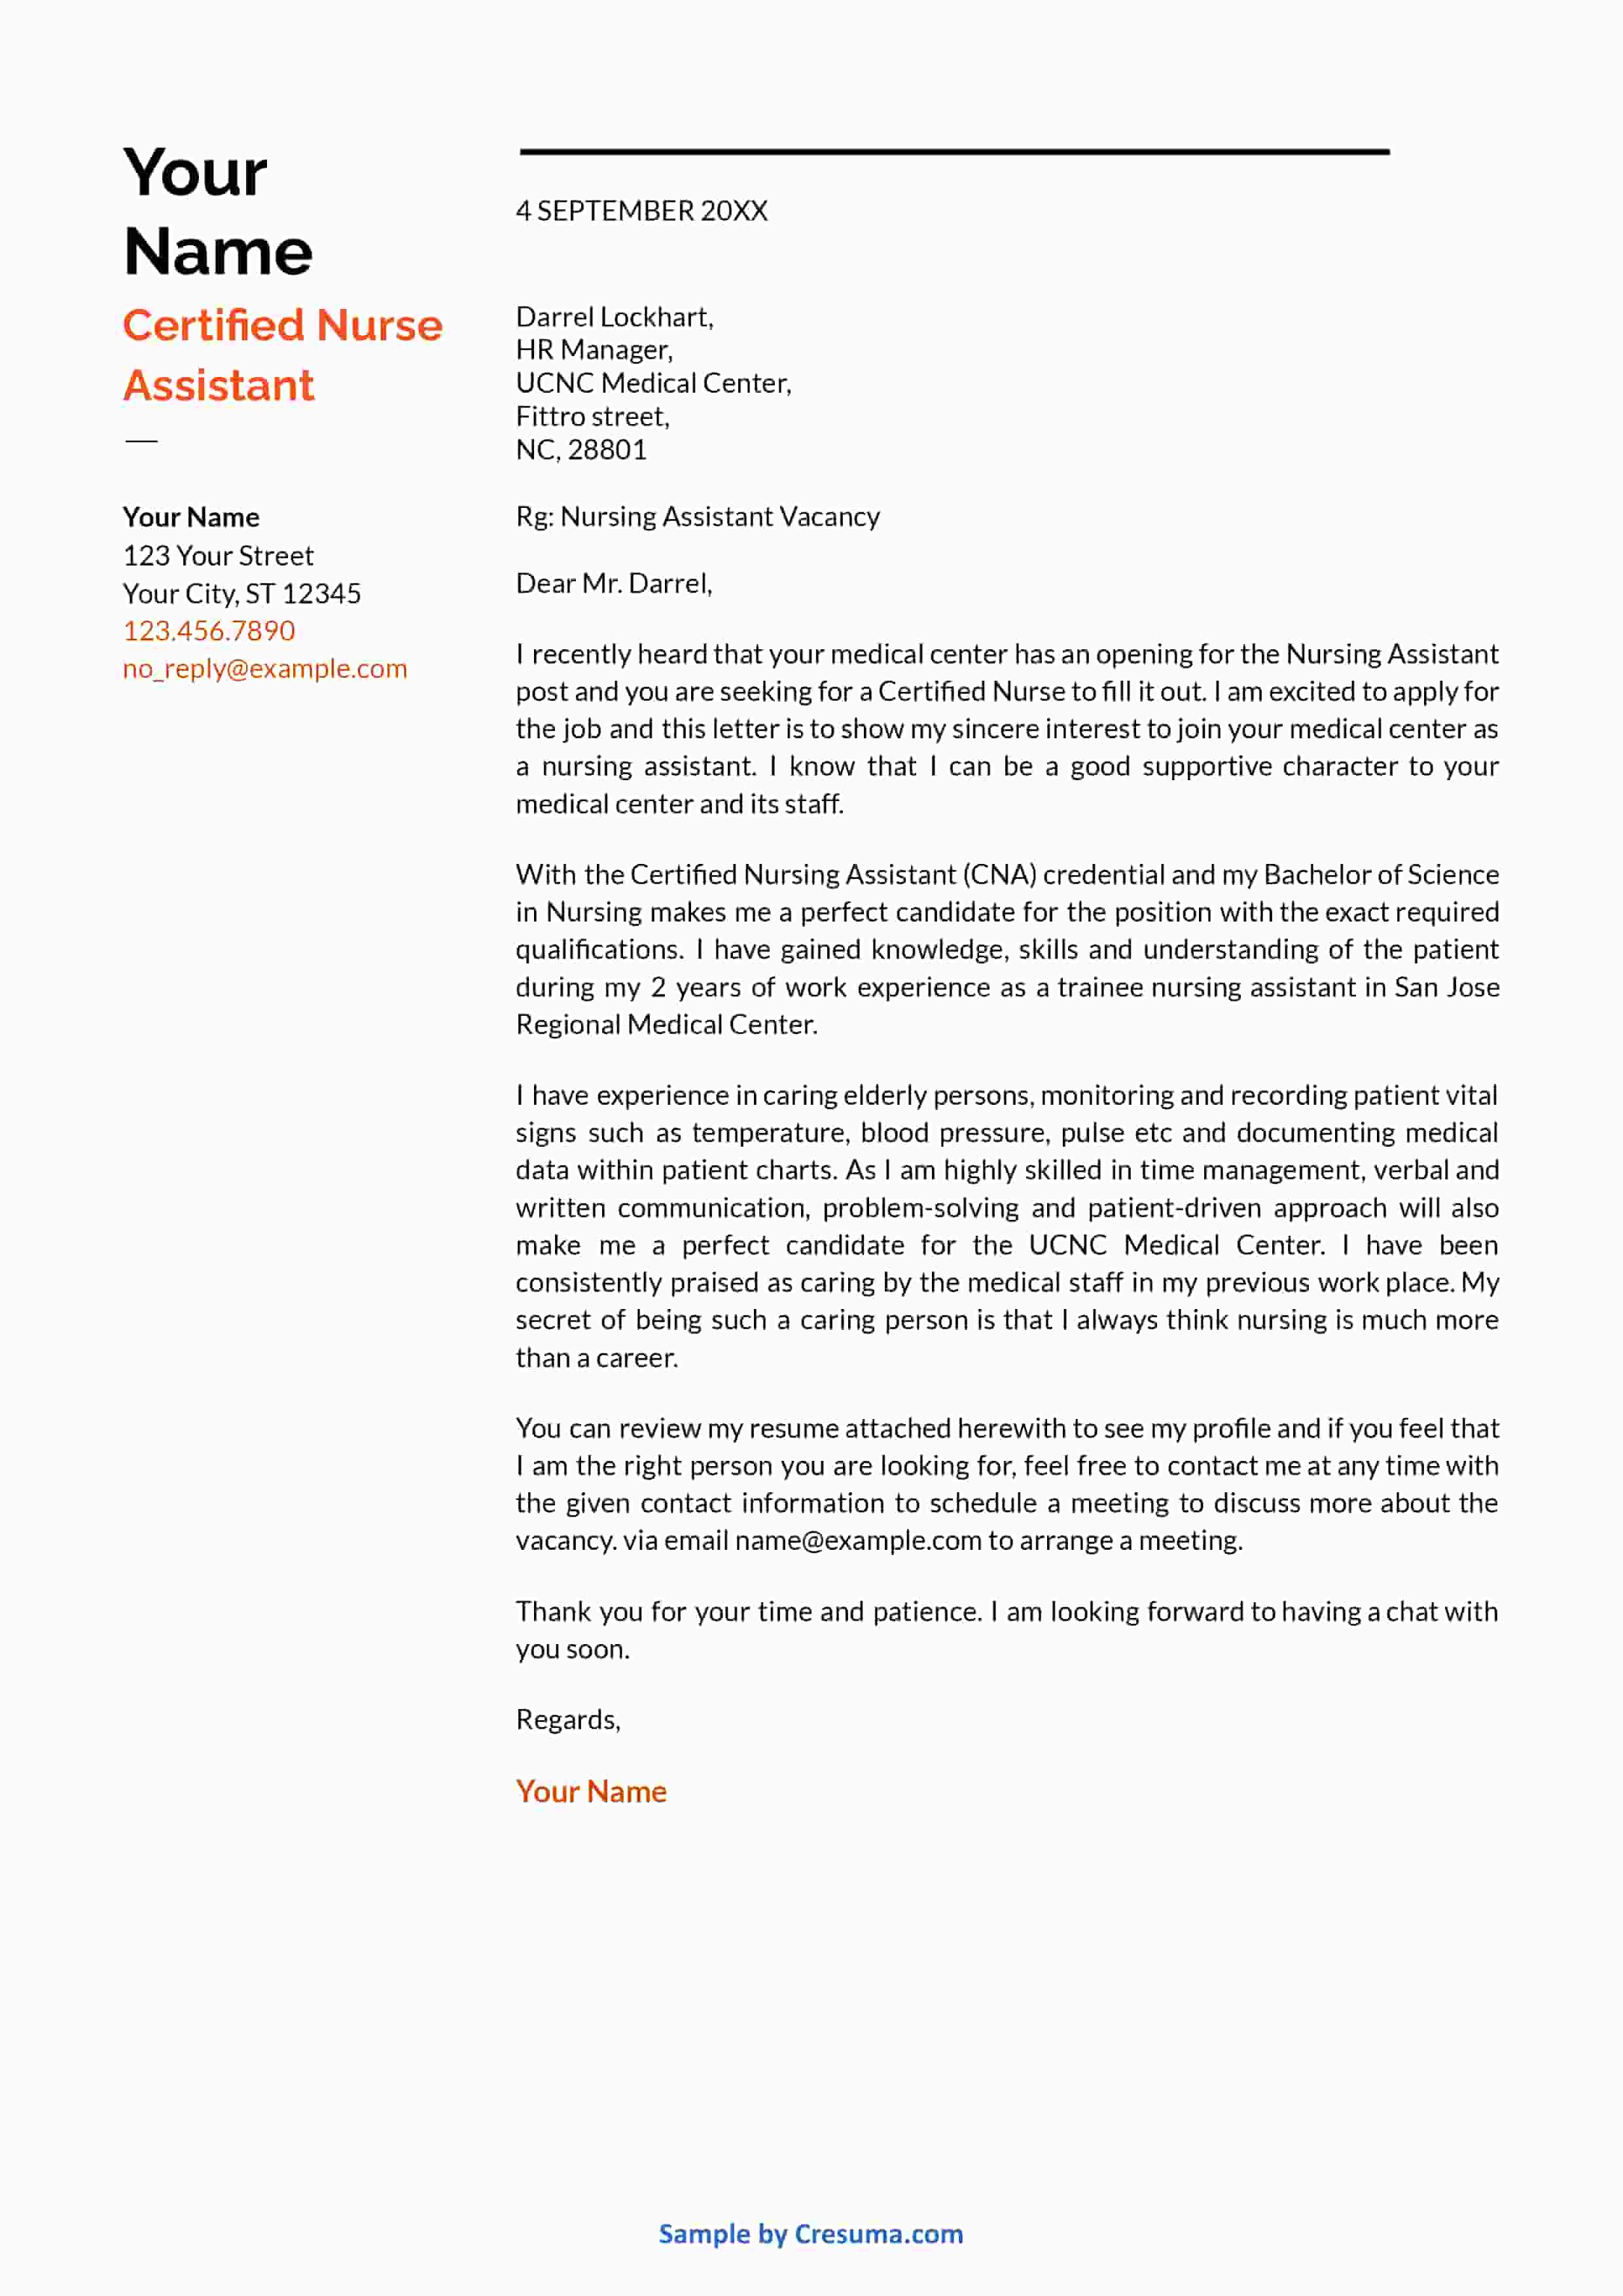 nurse assistant cover letter example